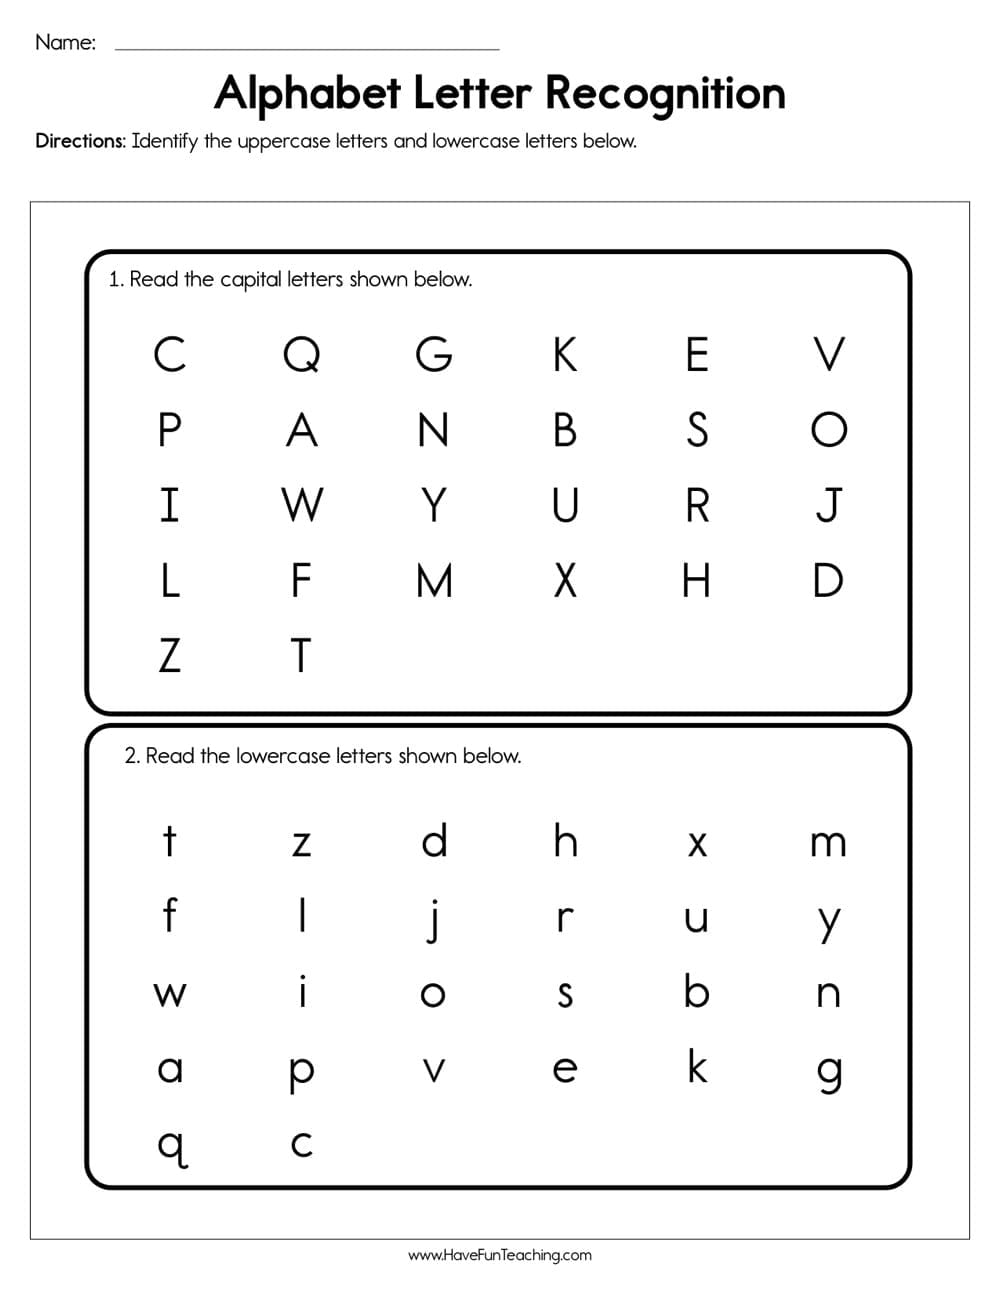 Alphabet Letter Recognition Assessment  Have Fun Teaching